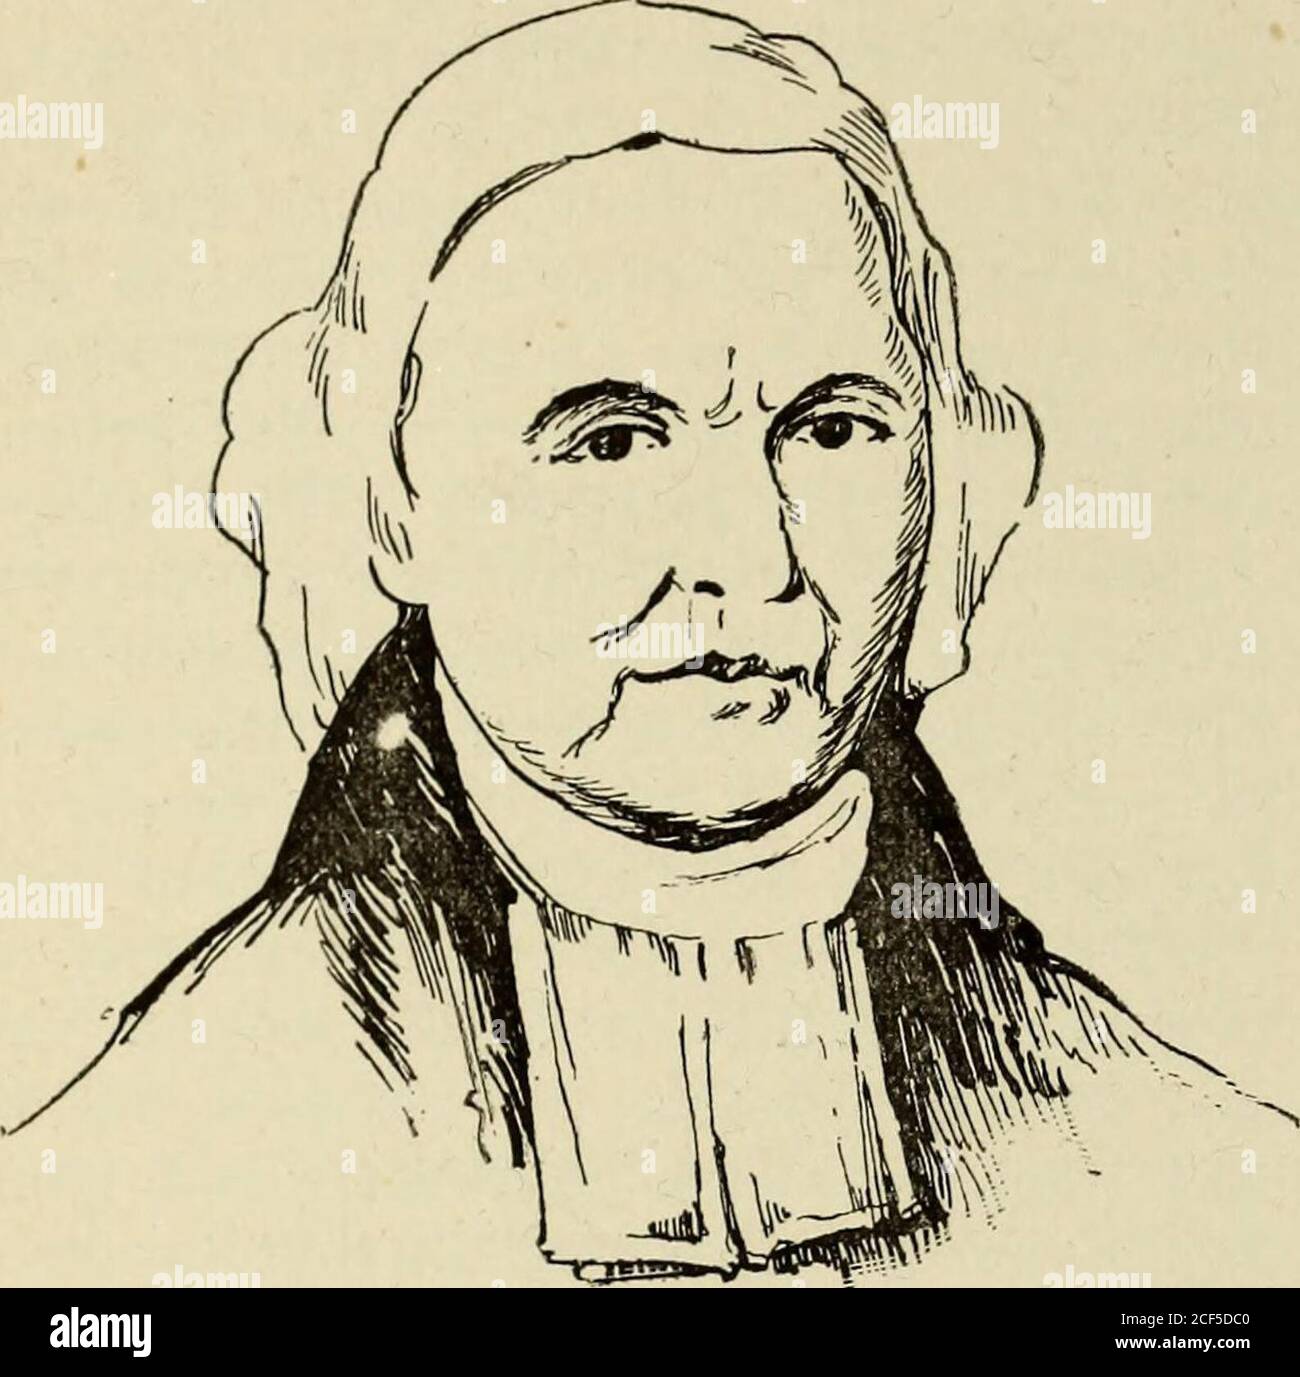 . The Jerseyman. nue to preach one-third of his time at the Stone Meeting Housein Kingwood agreeably to an order of lastmeeting. Rev. John Hanna was a son of JohnHanna and Jane Andre, his wife, who im-migrated from Ireland in 1731. He wasborn at sea during the voyage of his par-ents. He received his early education, hisdescendants say, at the Log College at Ne-shaminy, Bucks Co., Pa. He taught schoolwhen a young man at Lamington, Som&lt; rsetCo., X. J., where he became acquainted withMiss Mary, daughter of Rev. James McCrea,whom he afterwards married. She was ,1sister of Miss Jane McCrea. who Stock Photo